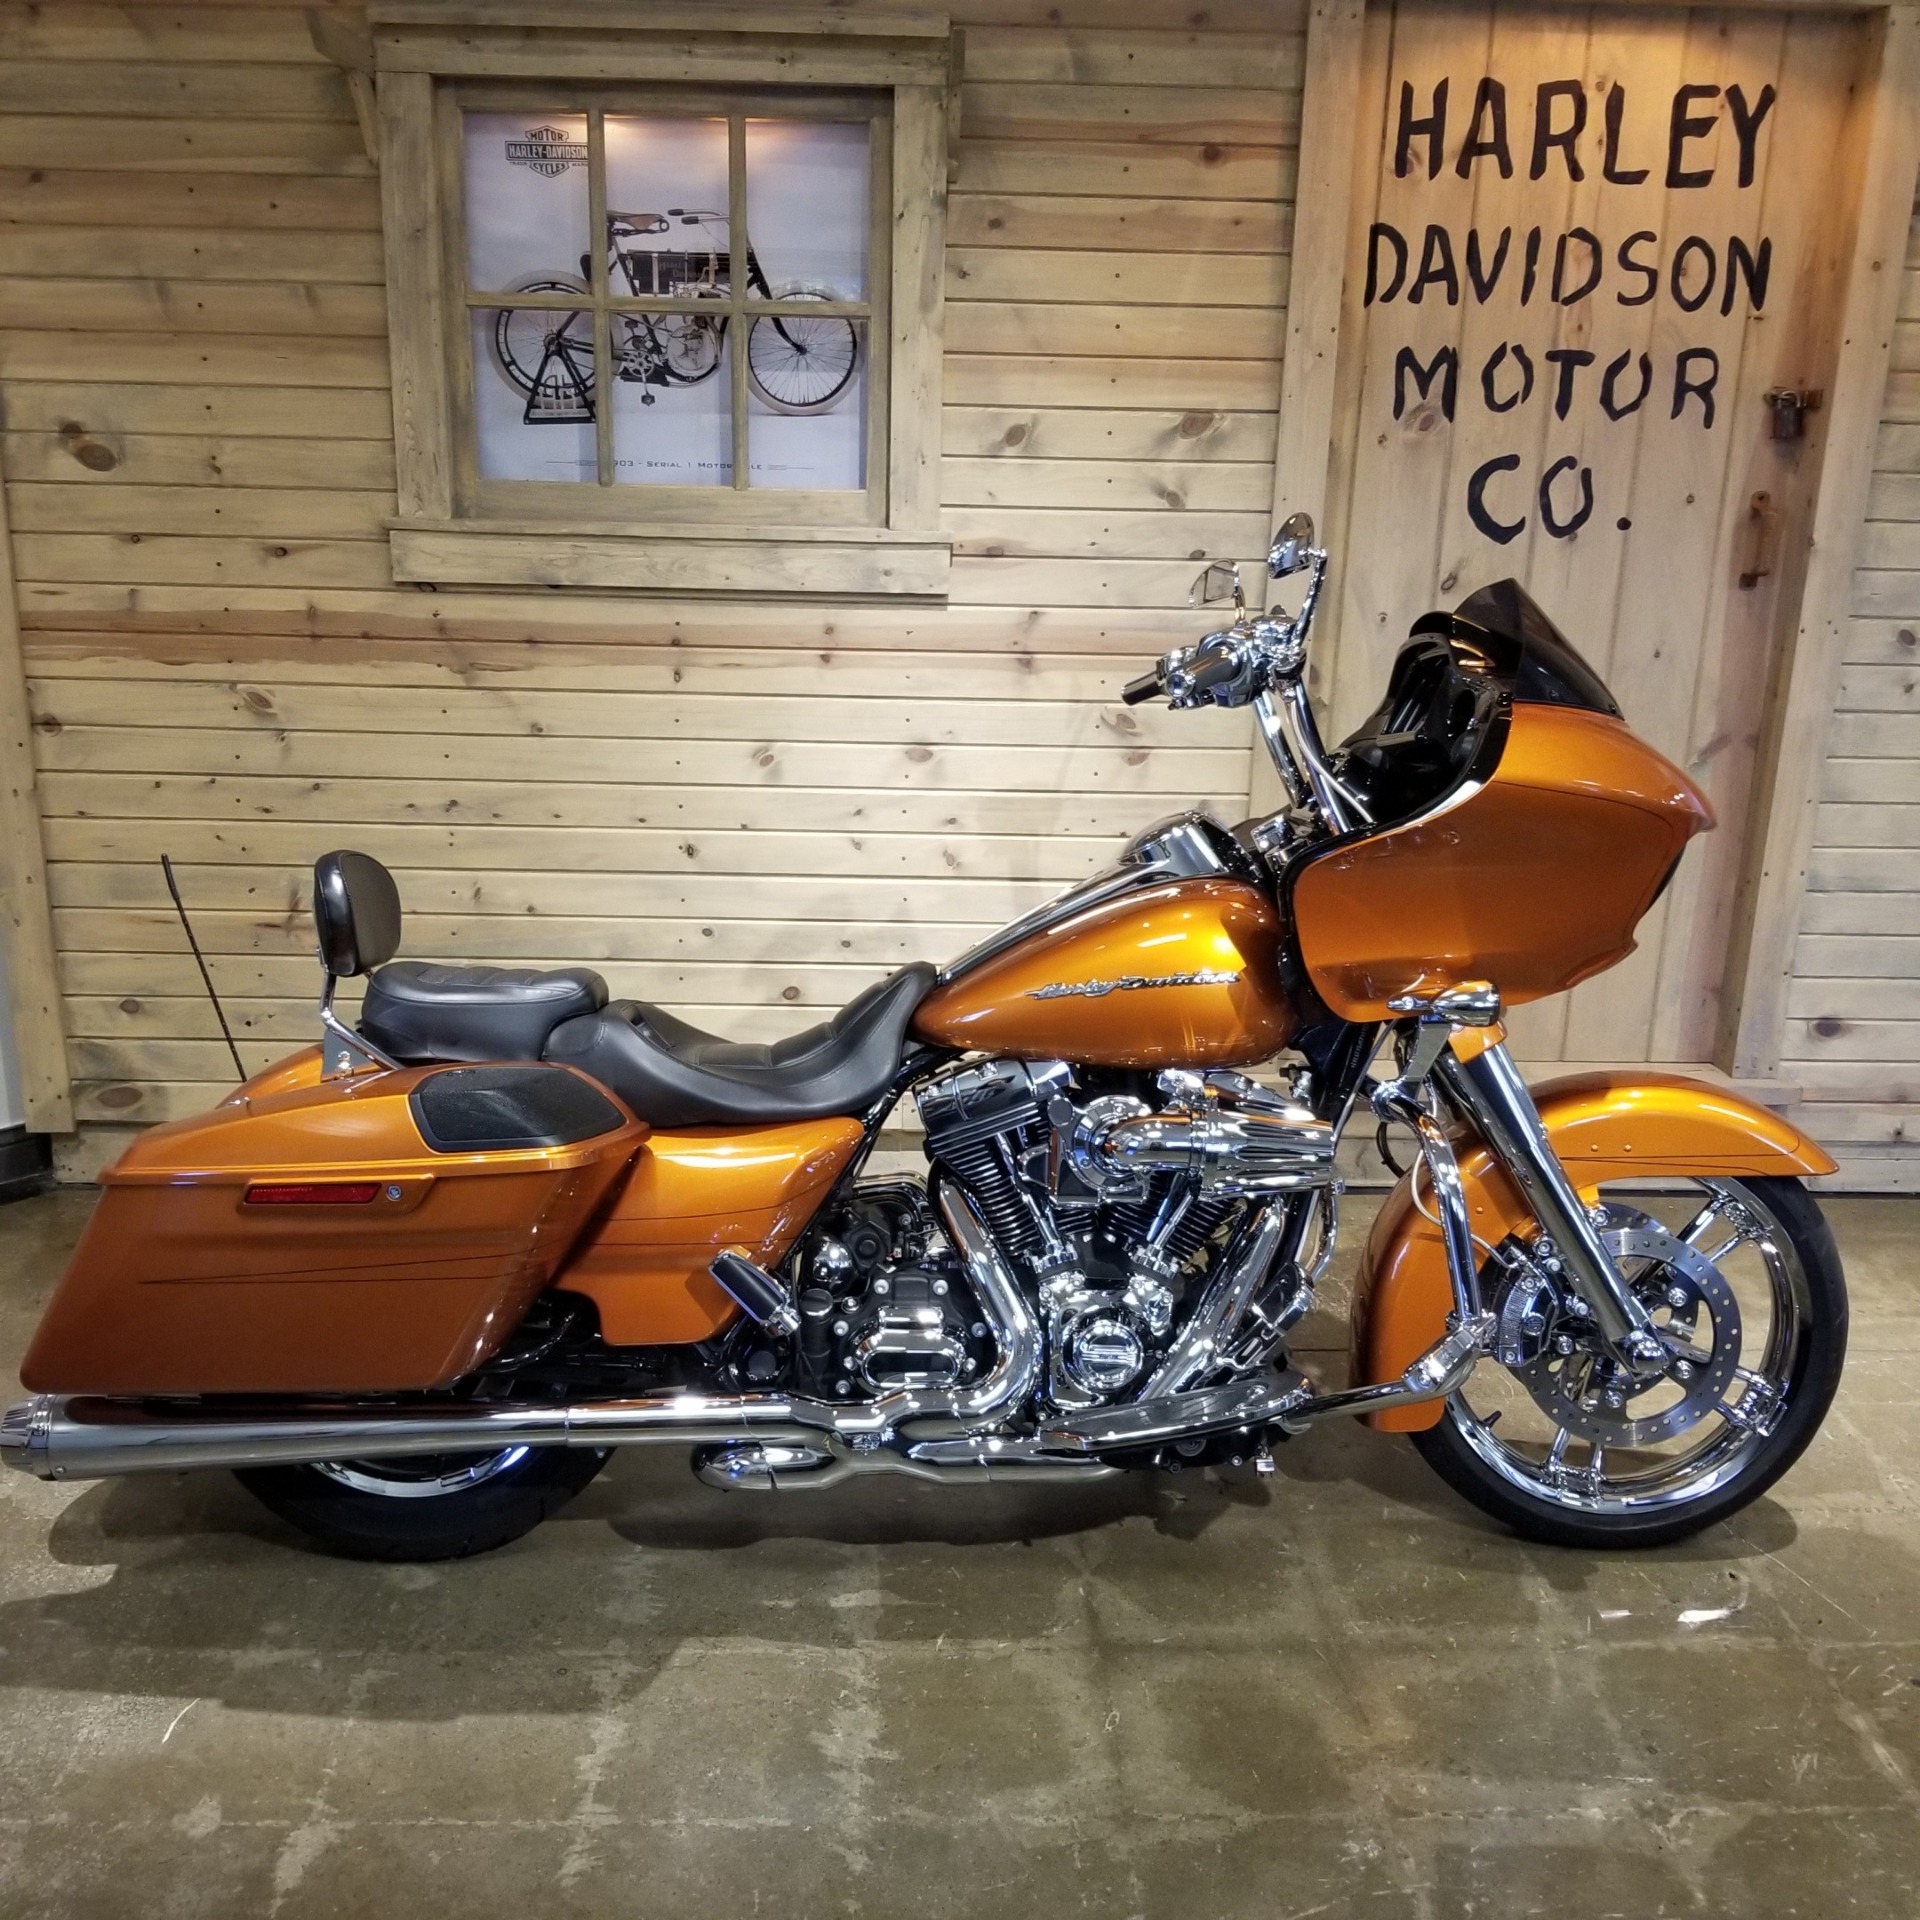 Used 2015 Harley-Davidson Road Glide® Special Motorcycles in Mentor, OH |  Stock Number: UP-B619352